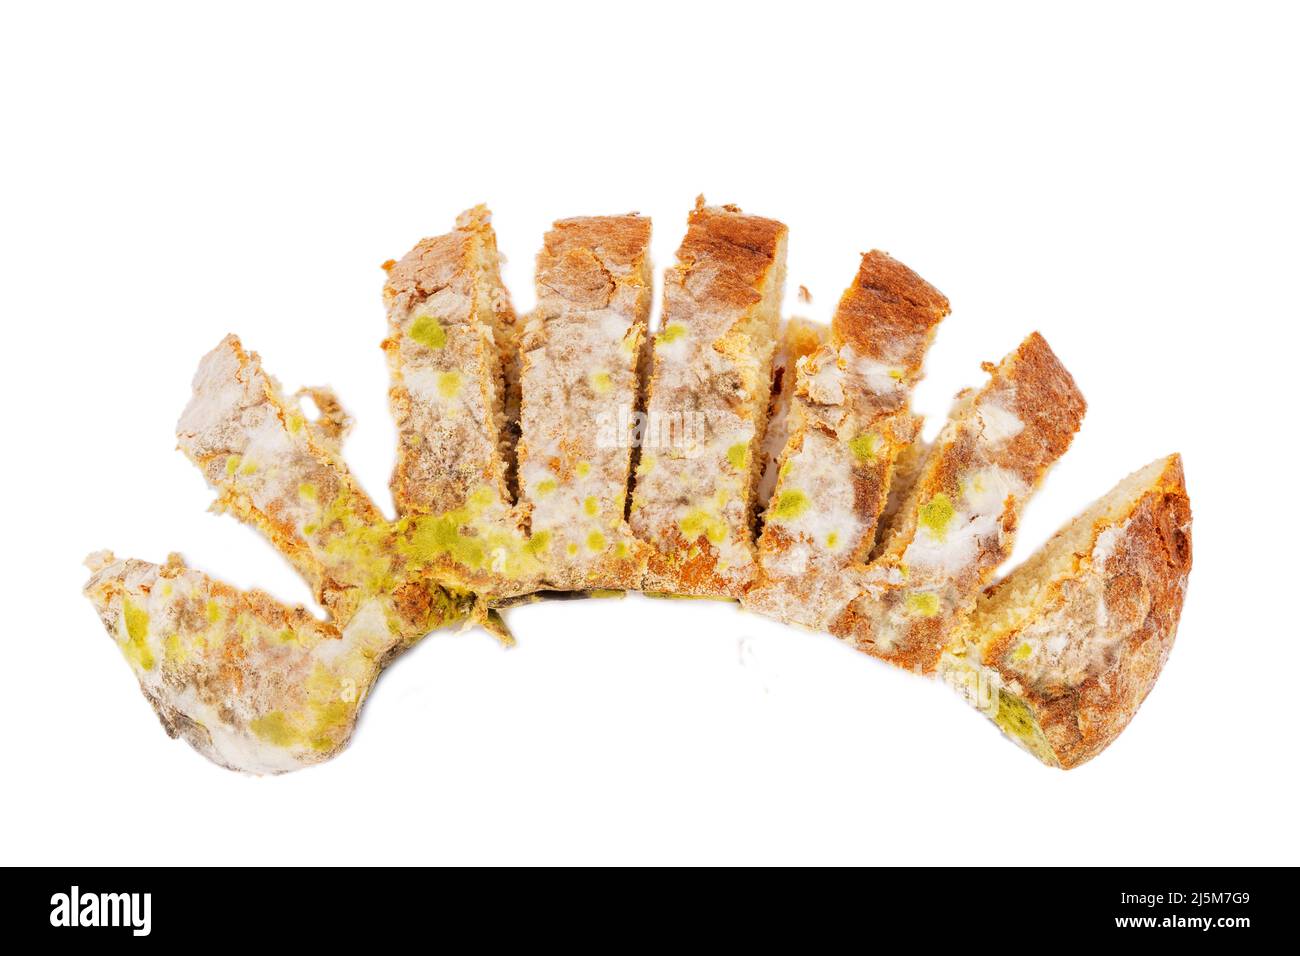 Mold on food. A mod for fluffy spores on bread. A piece of moldy bread on a white background. Stock Photo